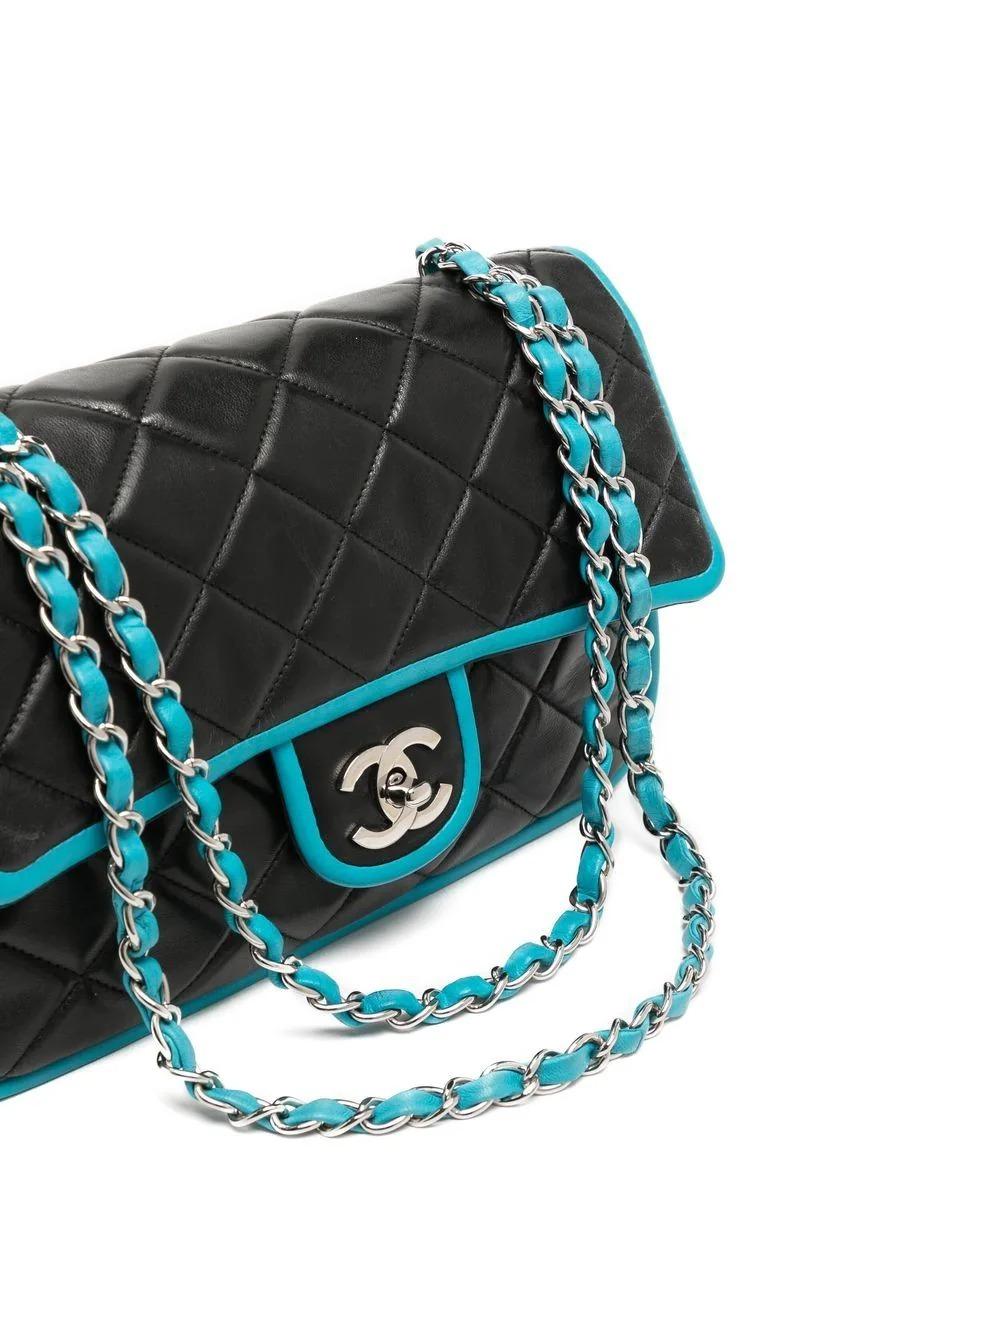 Chanel 2006 Medium Double Classic Flap in Black Lambskin Turquoise Piping Bag In Good Condition In Miami, FL